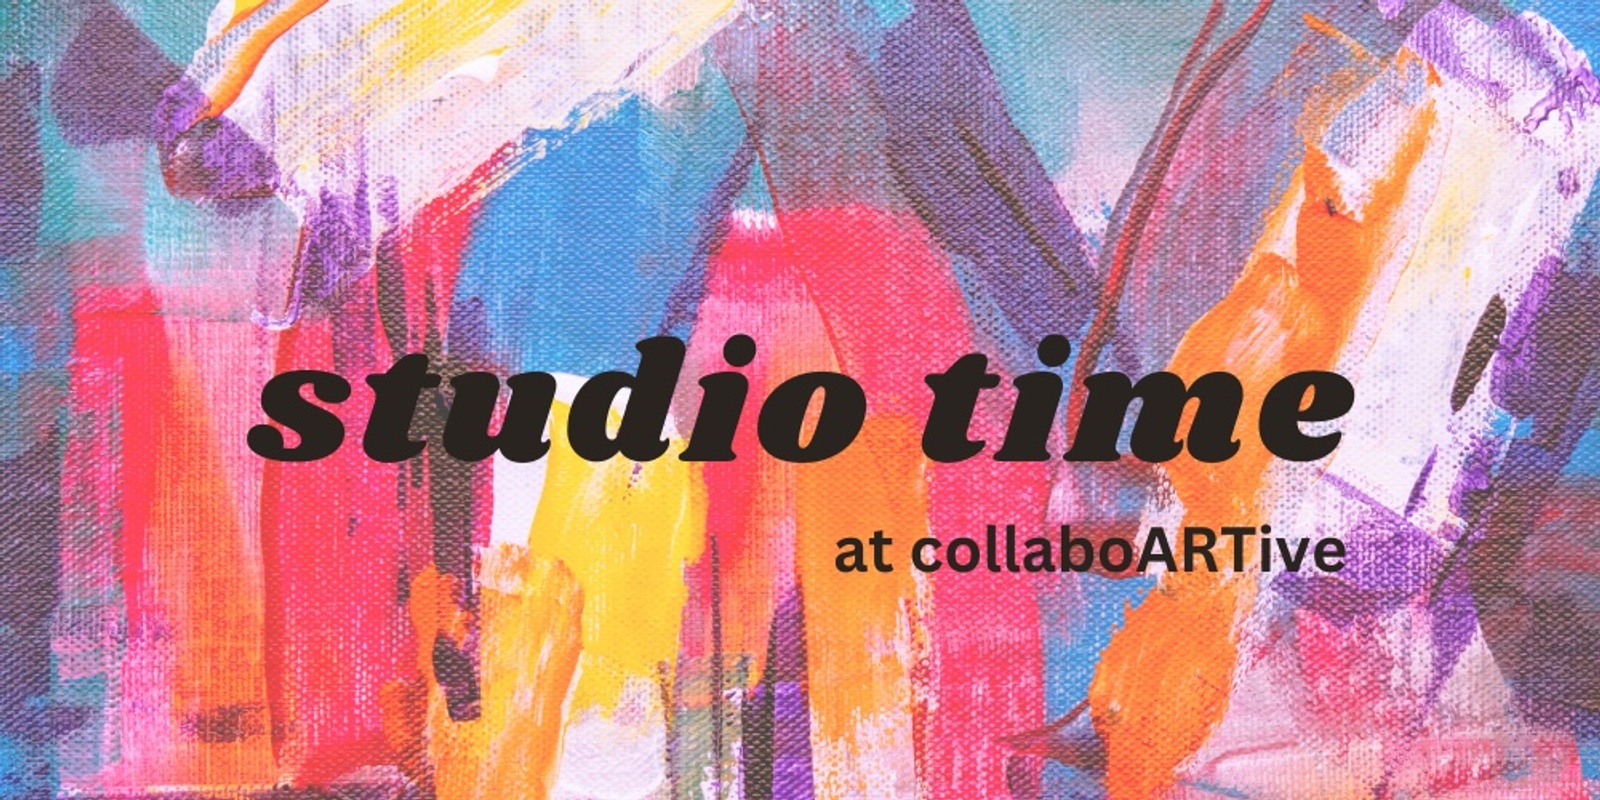 Banner image for Studio Time